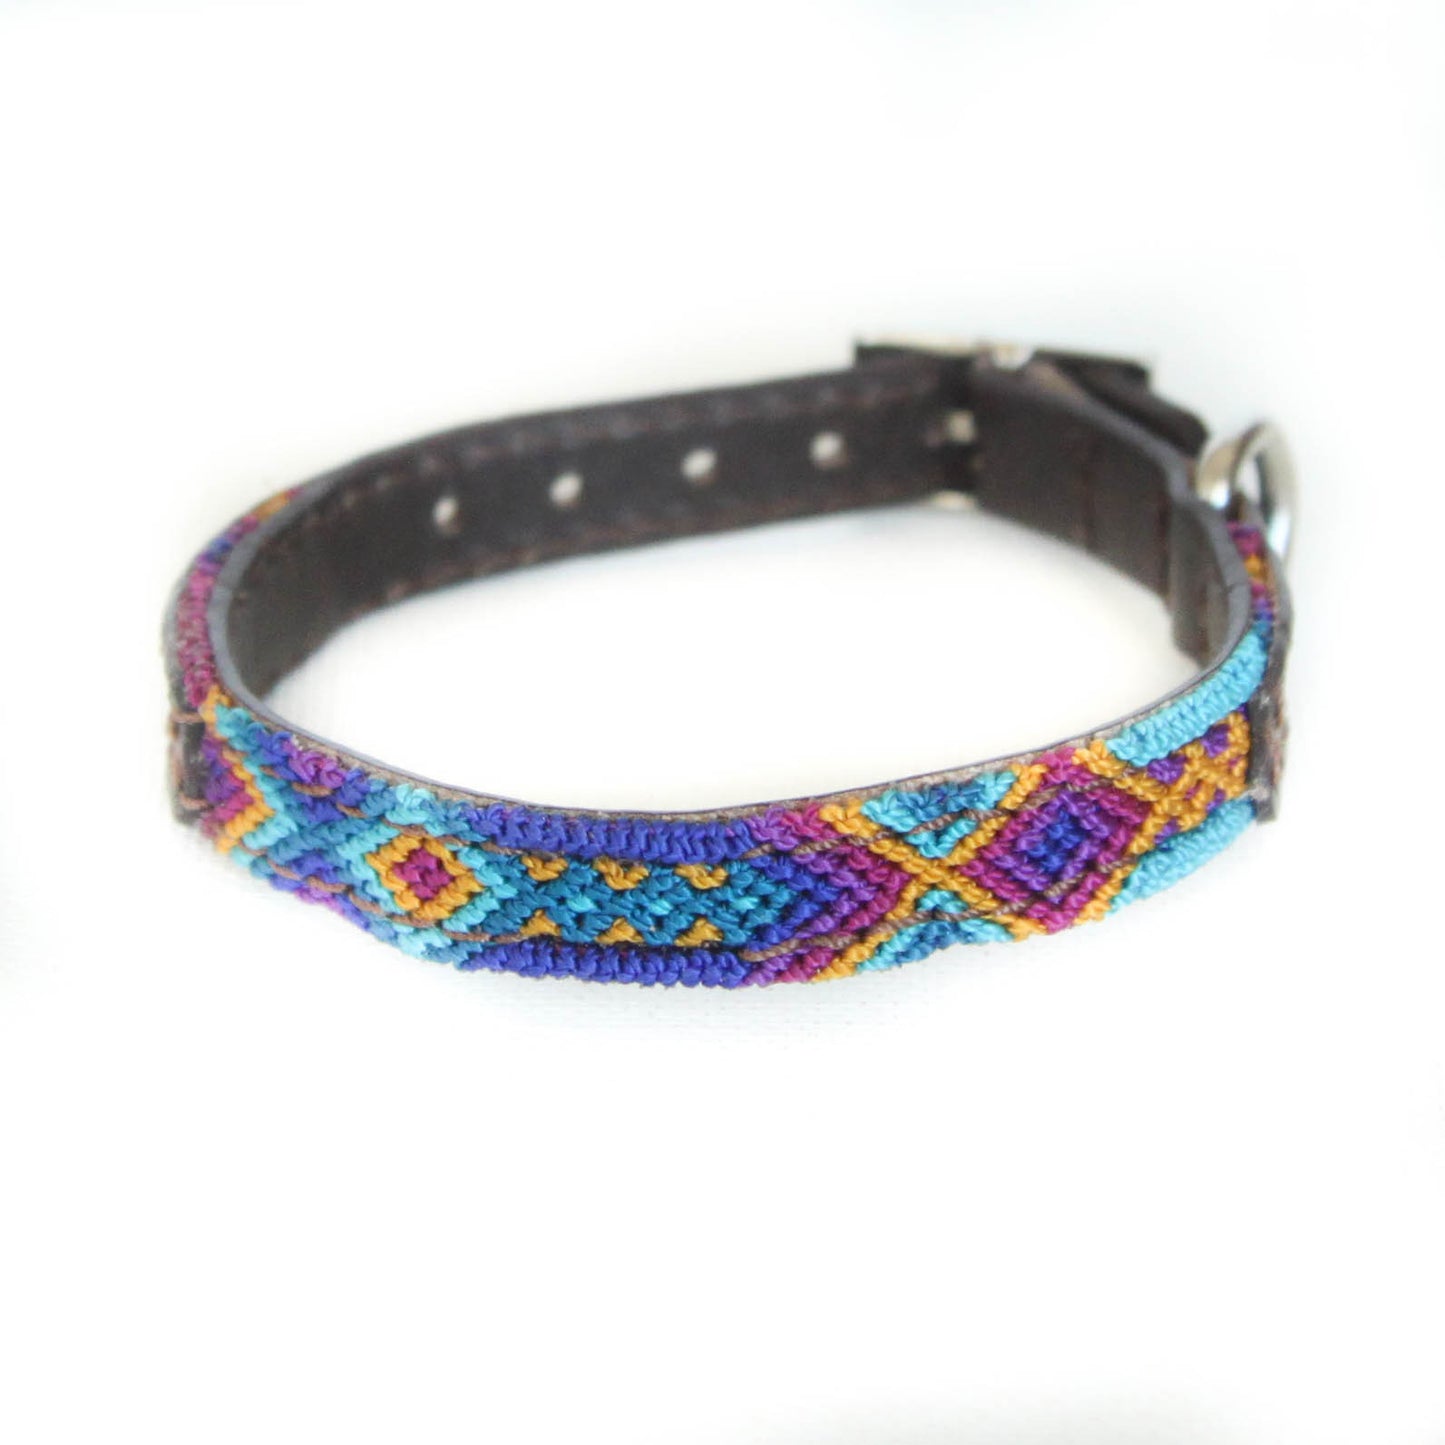 Lagoon - Embroidered Dog Collar With Leather